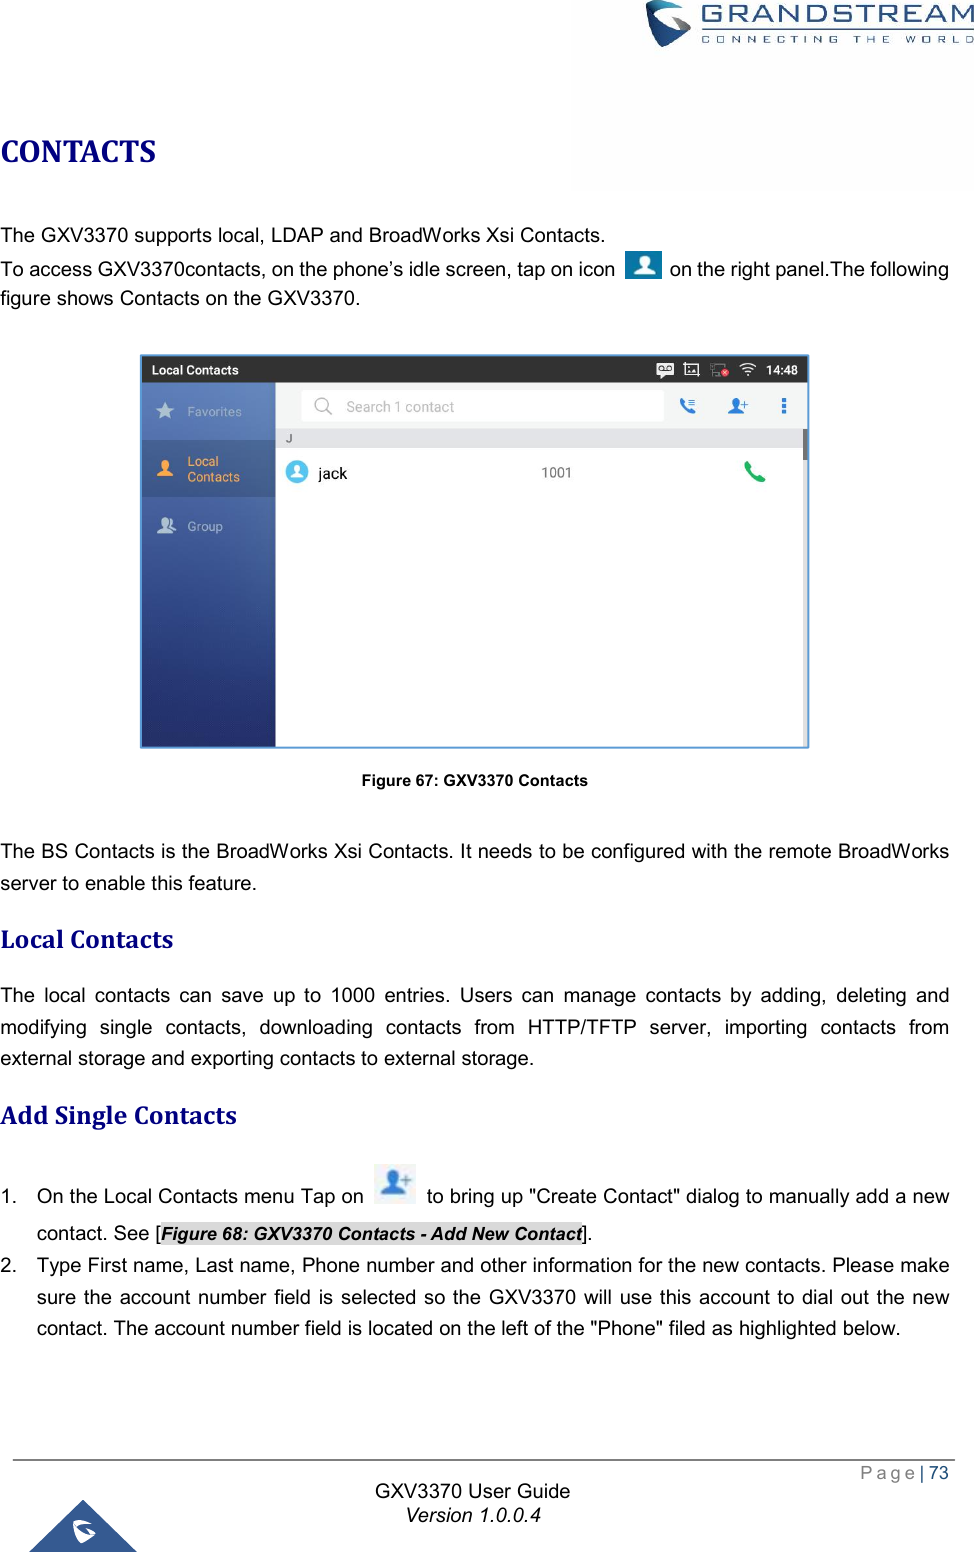  Page| 73  GXV3370 User Guide Version 1.0.0.4  CONTACTS The GXV3370 supports local, LDAP and BroadWorks Xsi Contacts.  To access GXV3370contacts, on the phone’s idle screen, tap on icon   on the right panel.The following figure shows Contacts on the GXV3370.   Figure 67: GXV3370 Contacts  The BS Contacts is the BroadWorks Xsi Contacts. It needs to be configured with the remote BroadWorks server to enable this feature. Local Contacts The local contacts can save up to 1000 entries. Users can manage contacts by adding, deleting and modifying single contacts, downloading contacts from HTTP/TFTP server, importing contacts from external storage and exporting contacts to external storage. Add Single Contacts 1. On the Local Contacts menu Tap on   to bring up &quot;Create Contact&quot; dialog to manually add a new contact. See [Figure 68: GXV3370 Contacts - Add New Contact]. 2. Type First name, Last name, Phone number and other information for the new contacts. Please make sure the account number field is selected so the GXV3370 will use this account to dial out the new contact. The account number field is located on the left of the &quot;Phone&quot; filed as highlighted below.  